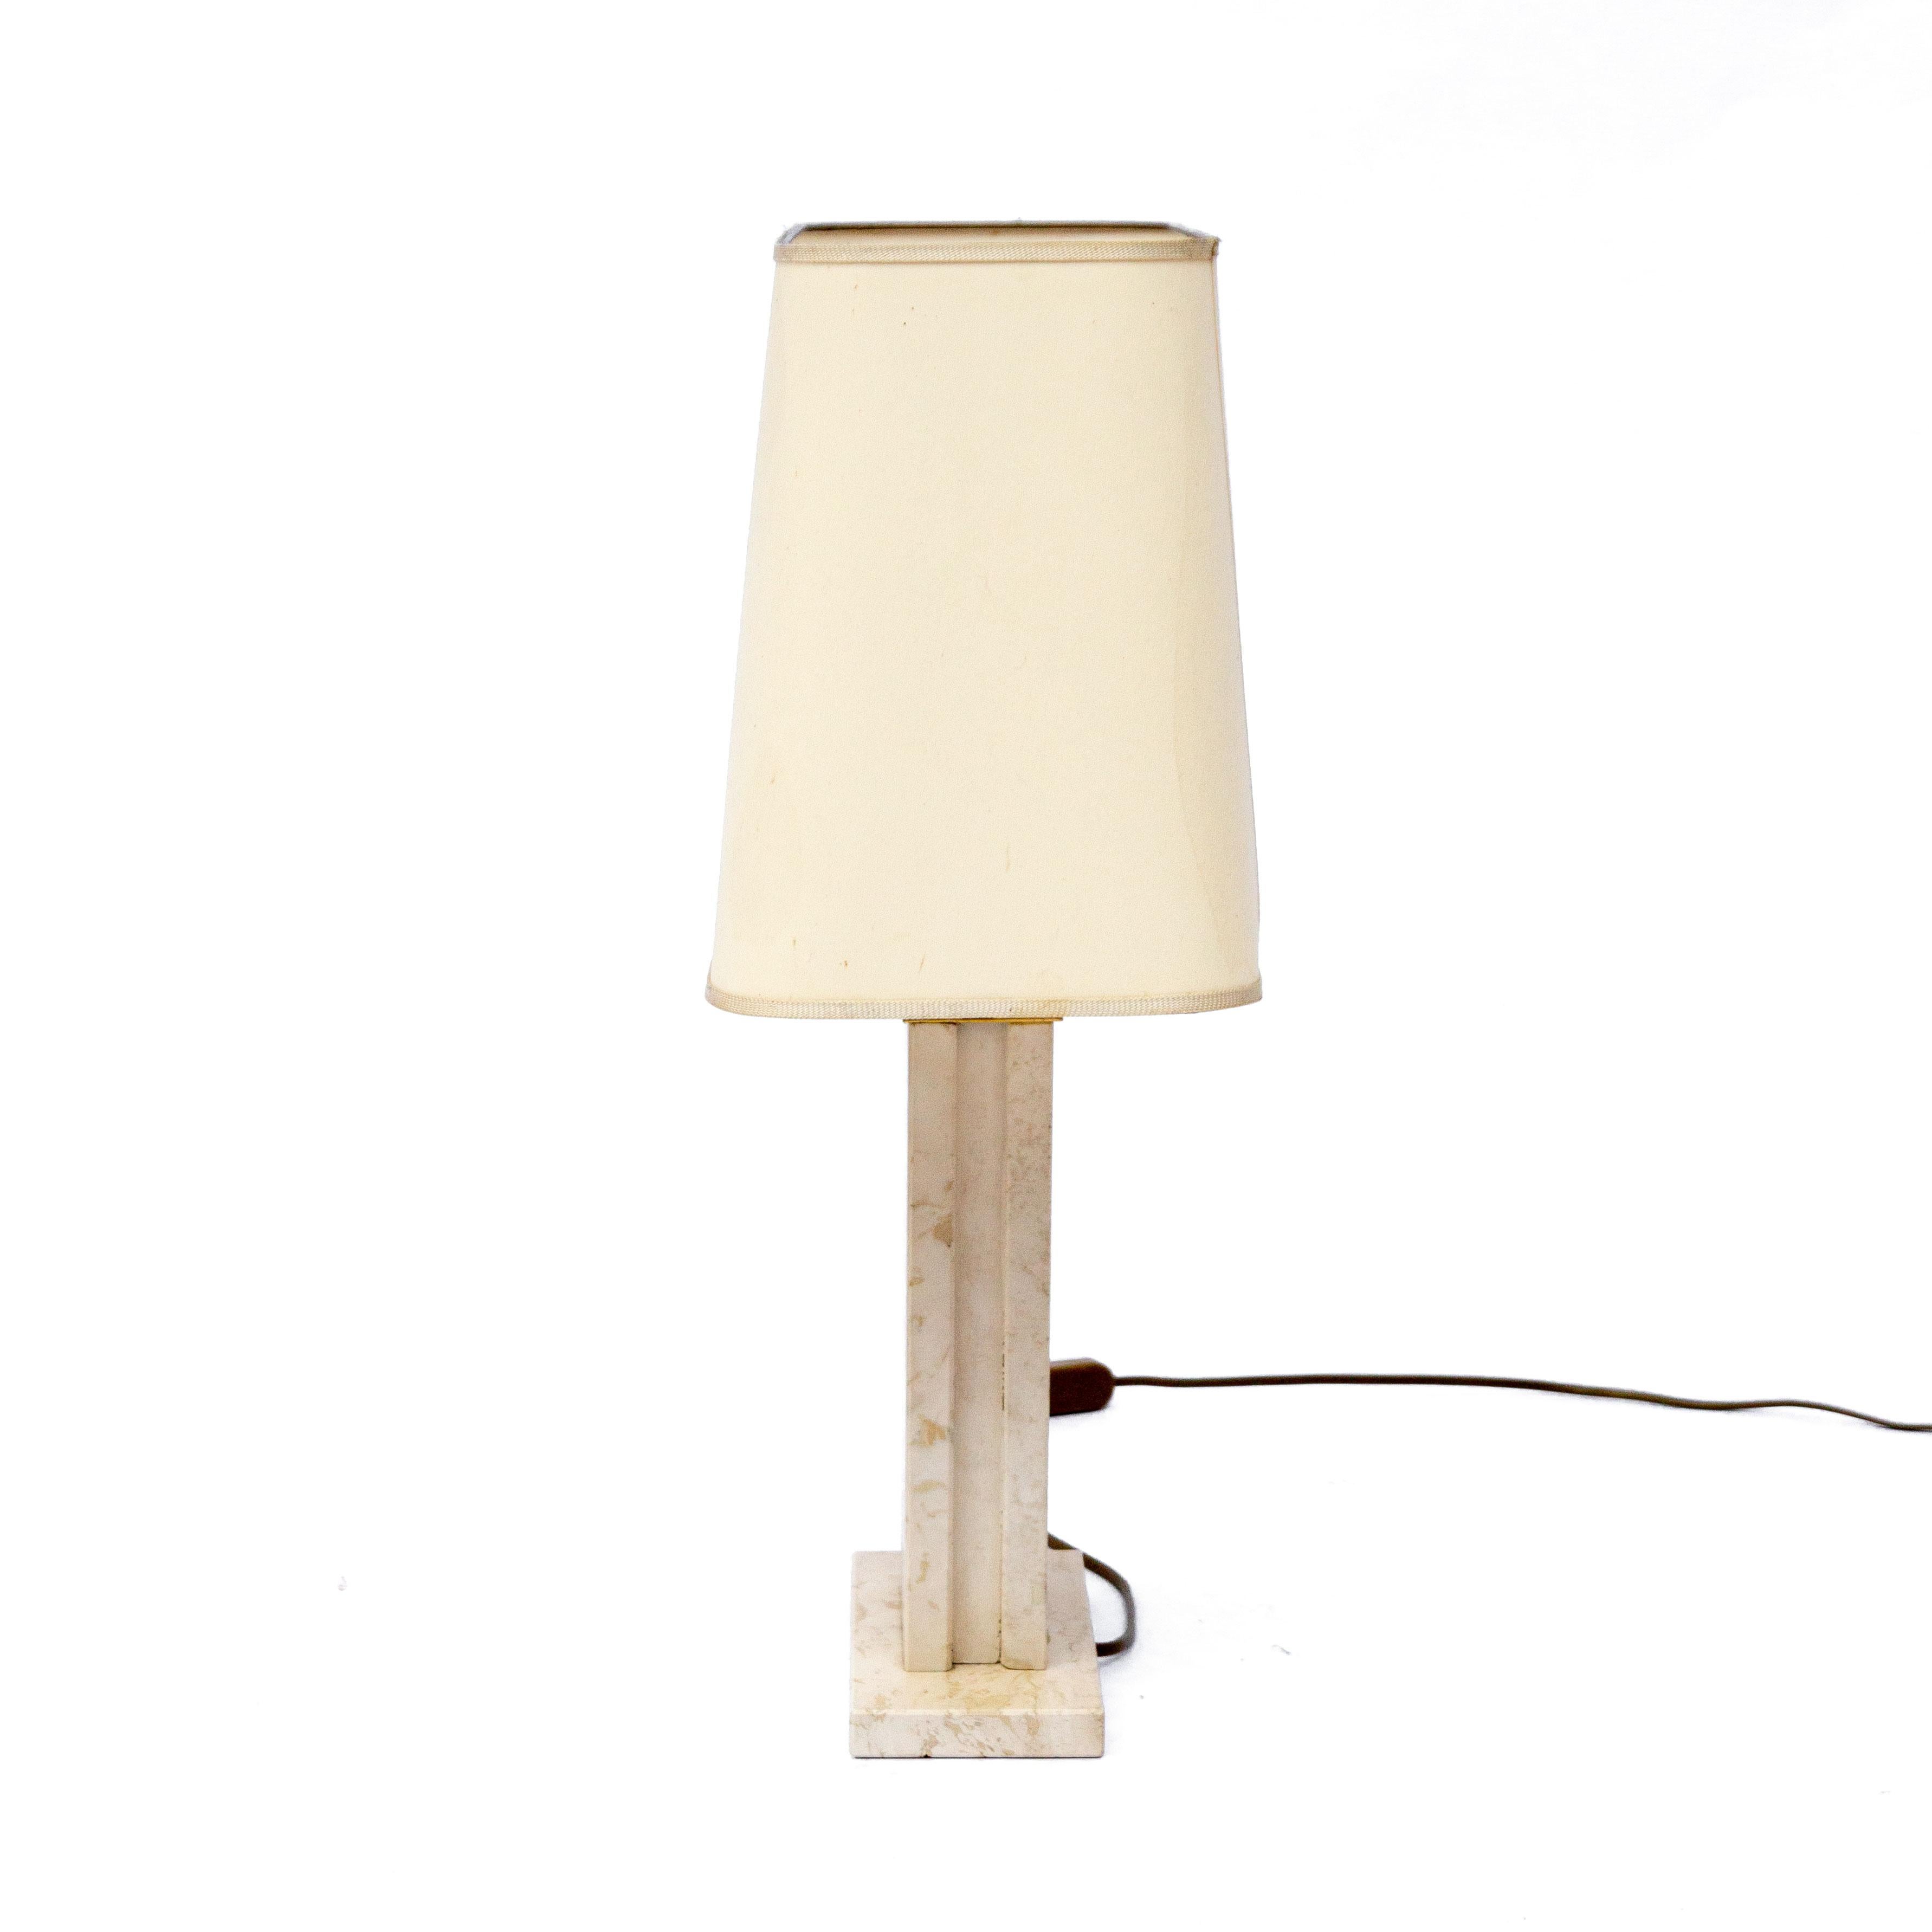 Traverine table lamp by Camille Breesch, Belgium with geometrical brass accents 1970s. The lamp features a travertine base with geometric brass details. Produced in Belgium 1970s. Designed by Camille Breesch. Shade is included. Basi is in good